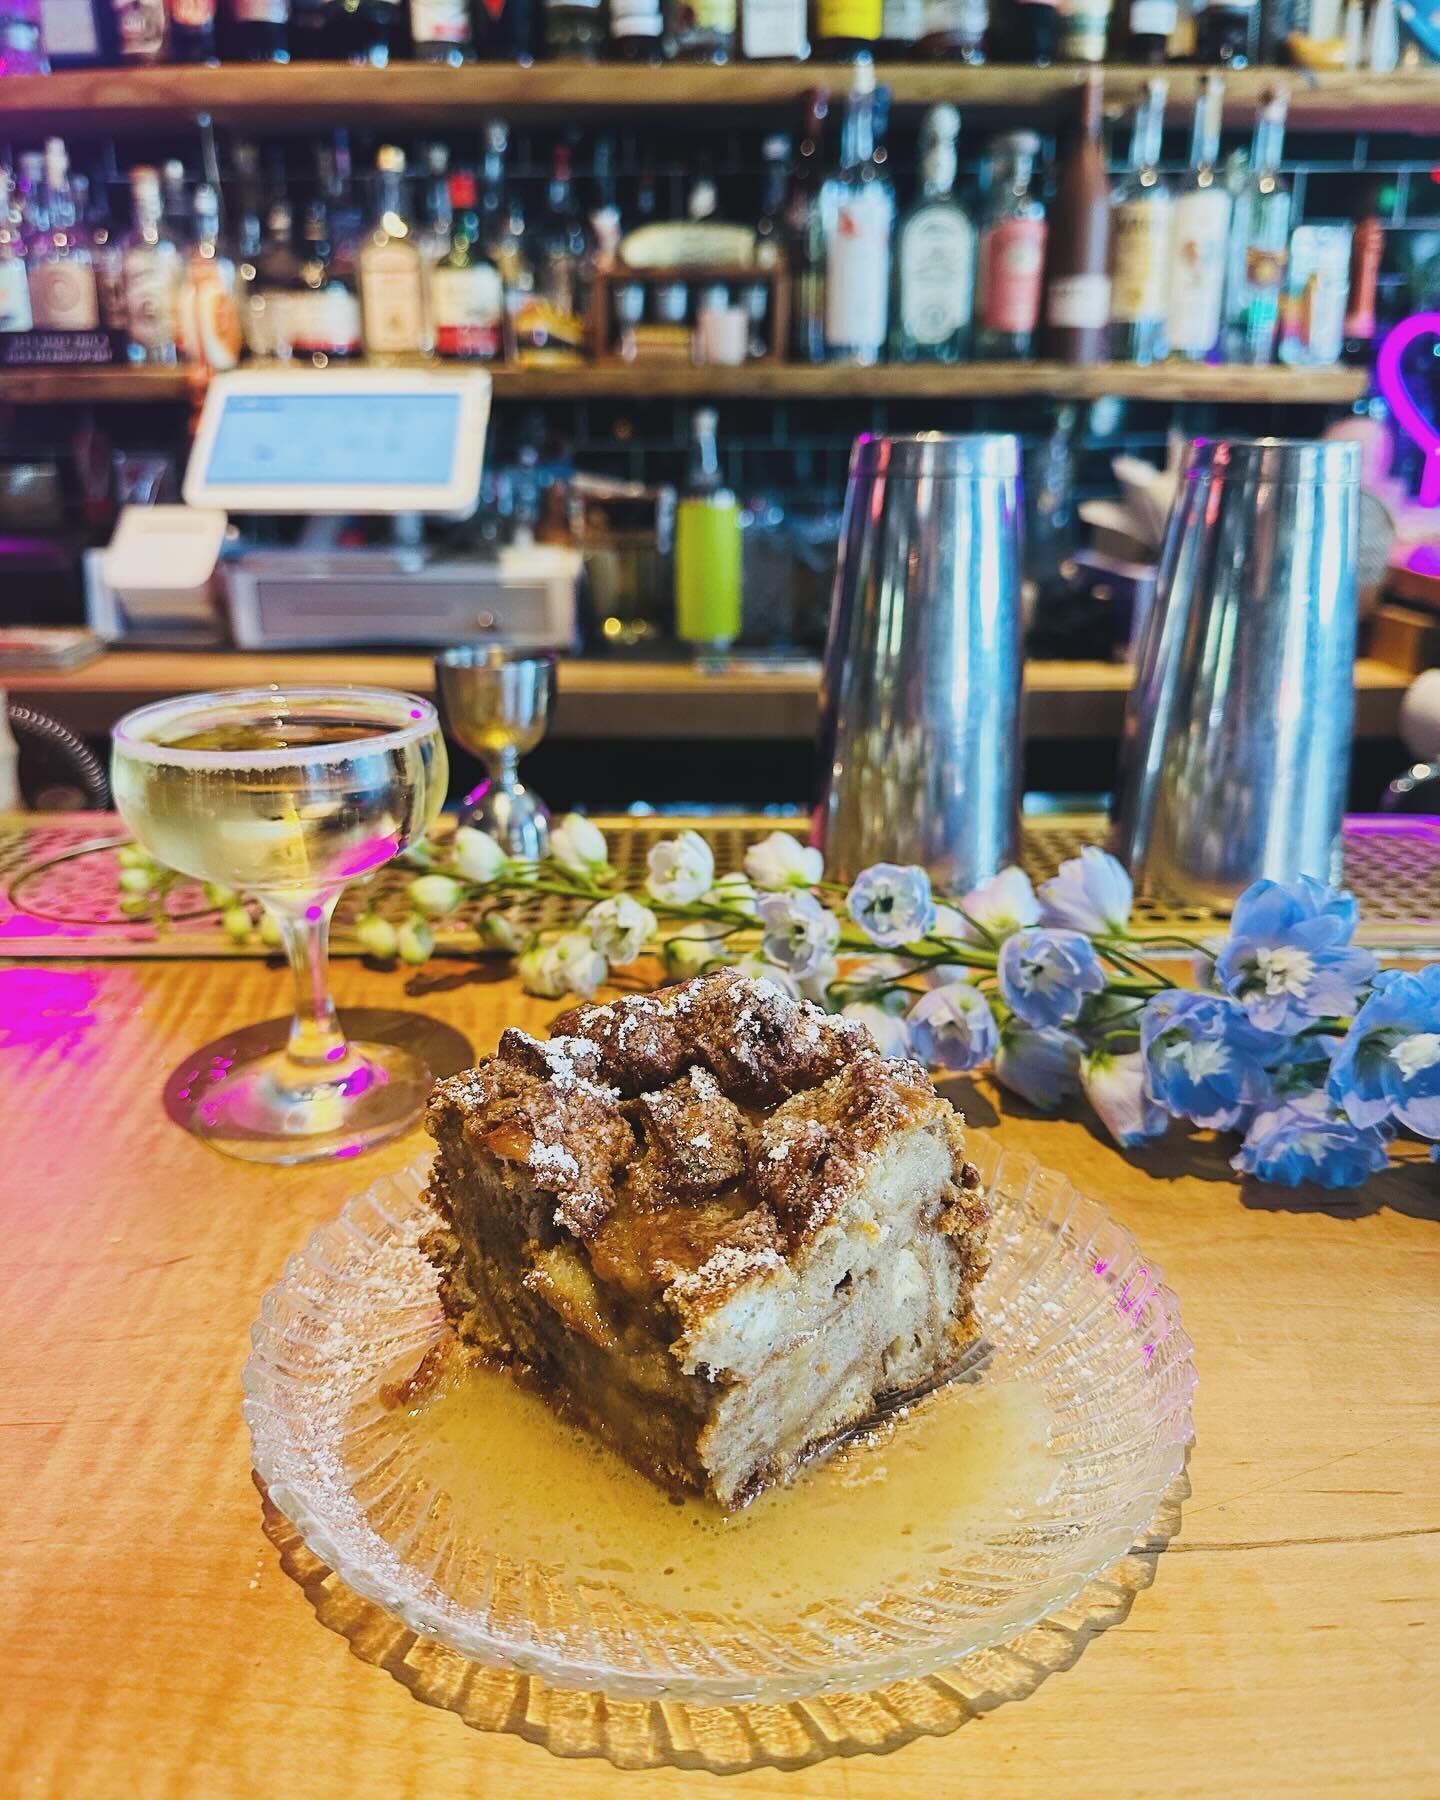 NEW dessert alert ✨ Spiked Bread Pudding | cinnamon bread pudding with bourbon butter scotch sauce 🤤

It&rsquo;s one to write home around ✍️

We&rsquo;re here with delicious food to 10pm and cockies &lsquo;til 🥂🌭
Stop on by!

#RawOysters #HotDogso